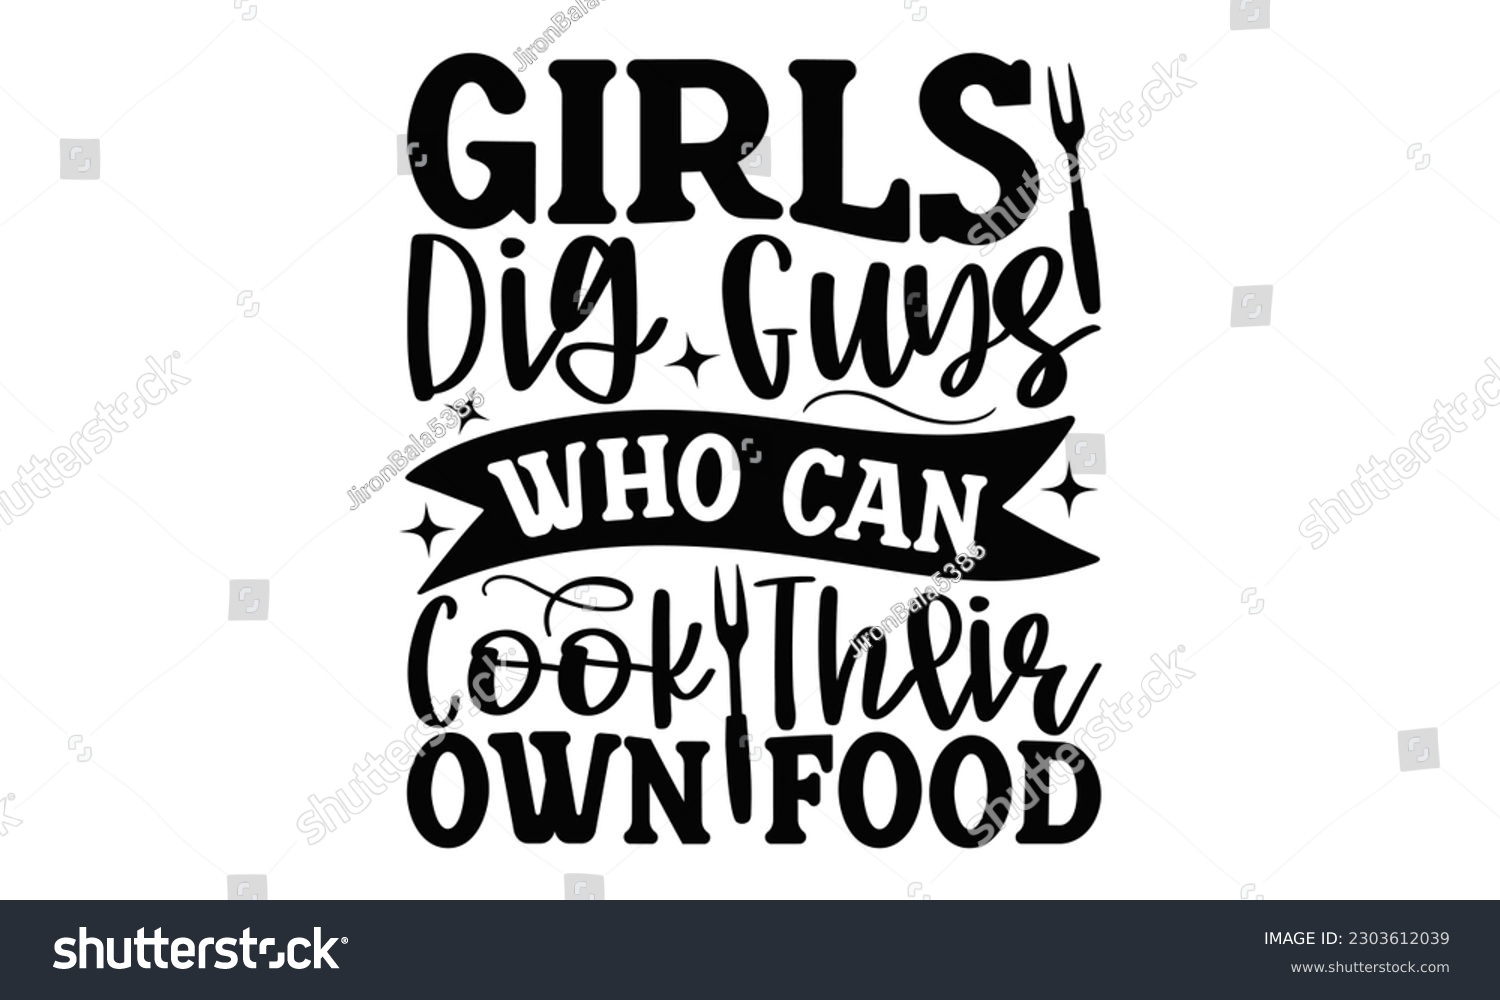 SVG of Girls Dig Guys Who Can Cook Their Own Food - Barbecue SVG Design, Isolated on white background, Illustration for prints on t-shirts, bags, posters, cards and Mug.
 svg